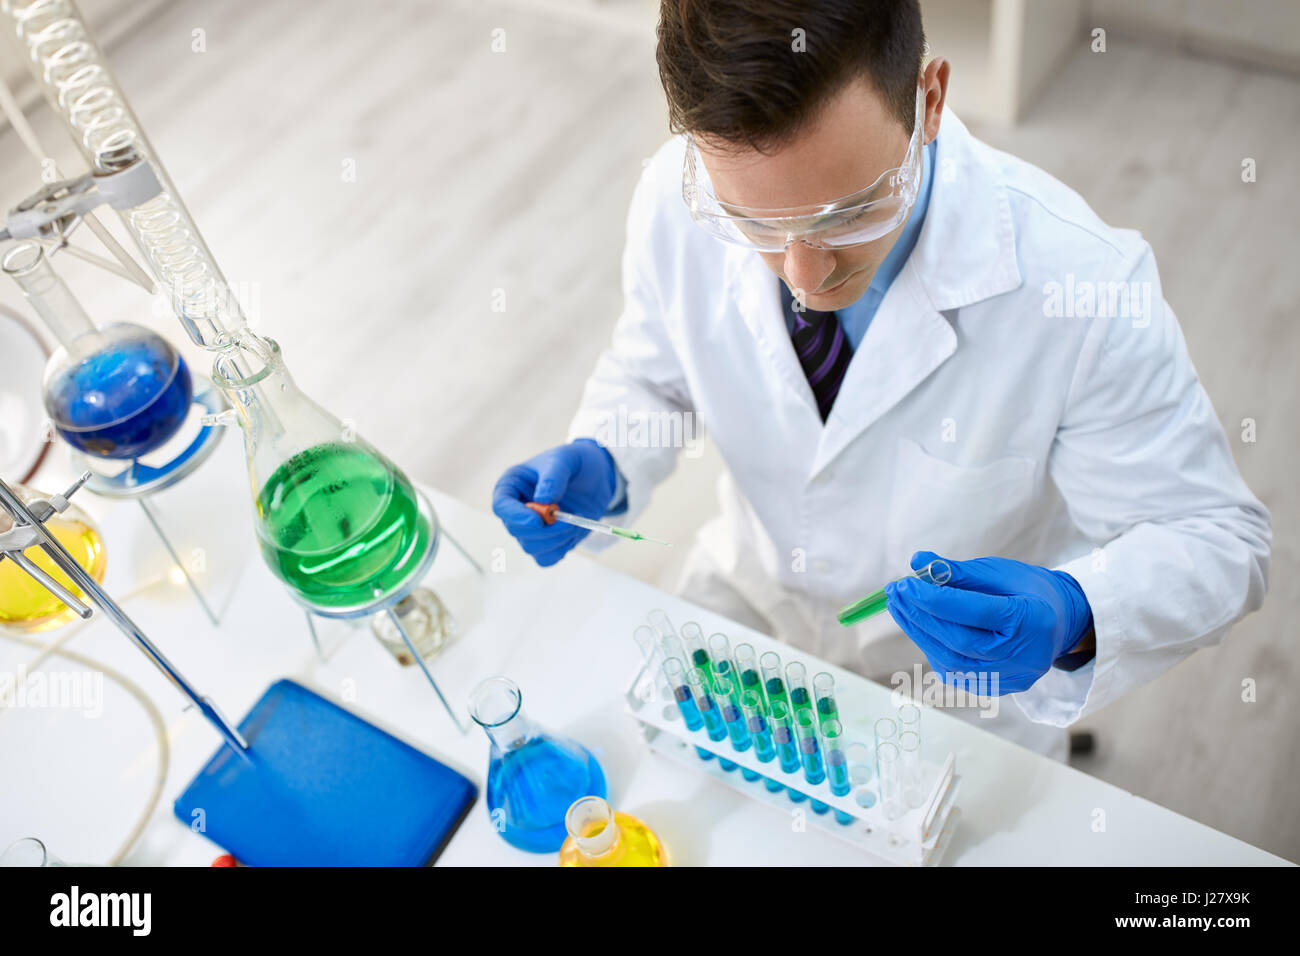 Male scientist carrying protective glasses doing experiment with test tube Stock Photo